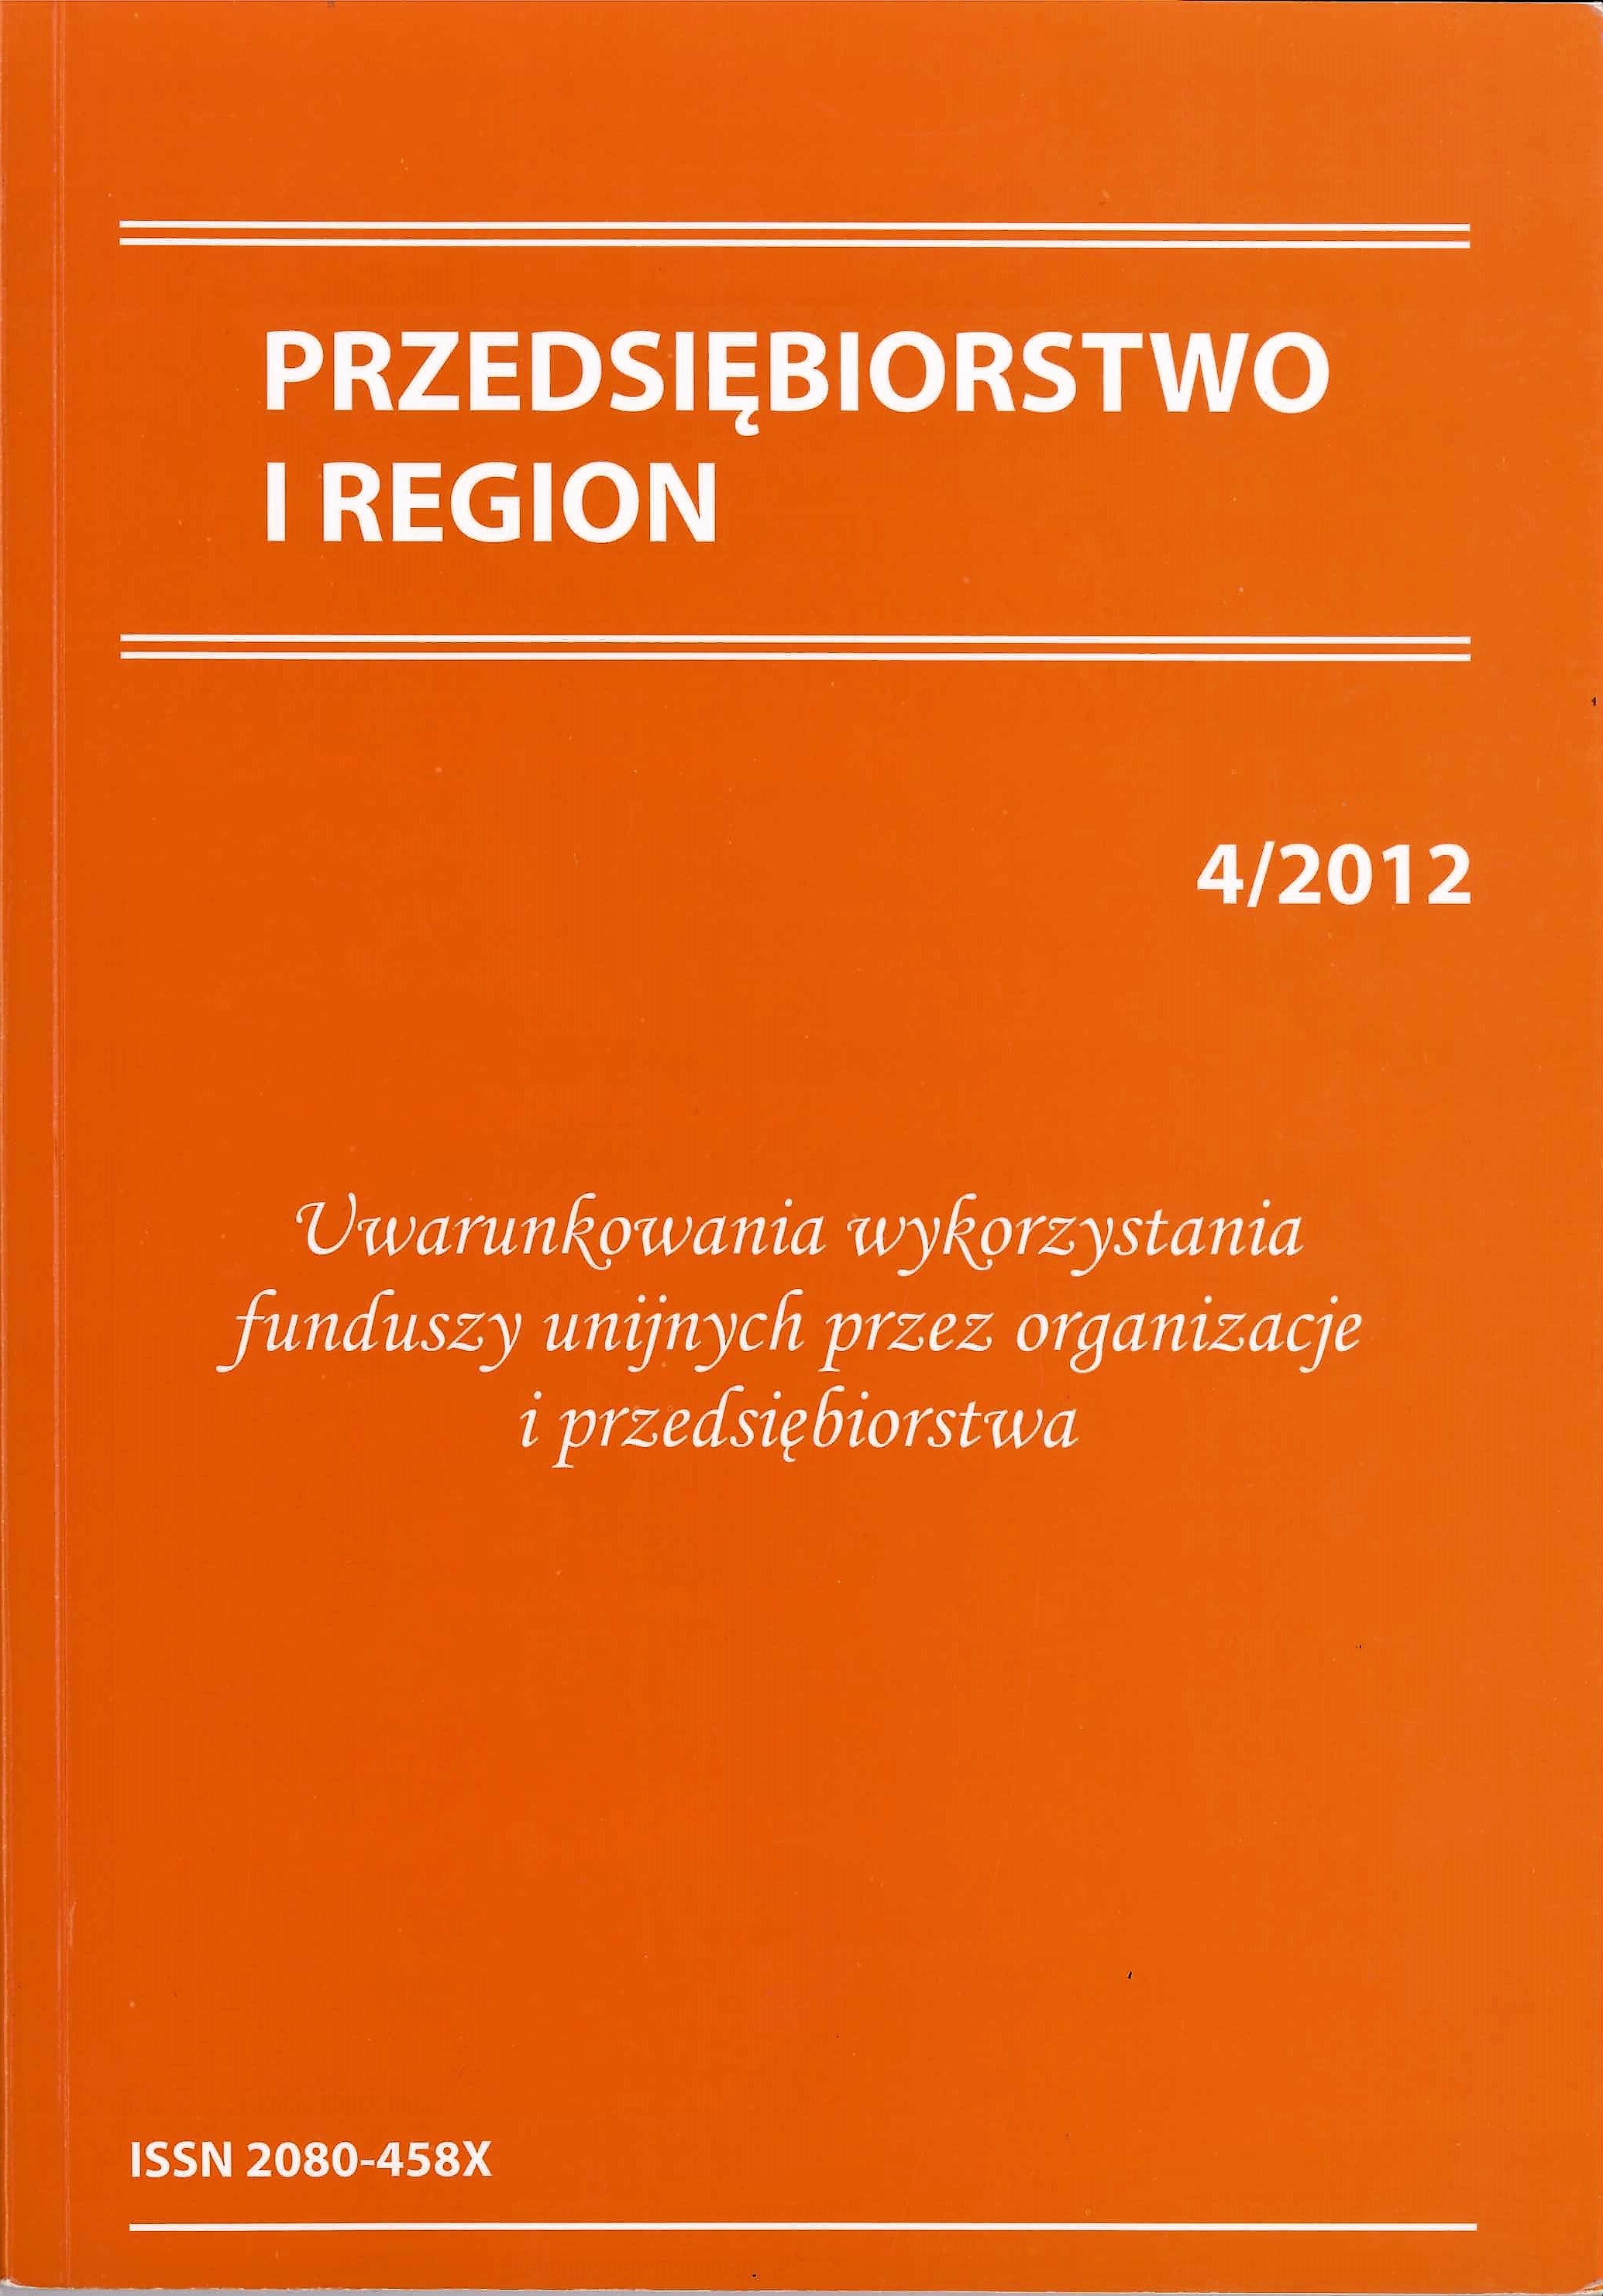 Growth of innovativeness and competitiveness of small and medium-sized enterprises in the lodz region with support of funds from the regional operational programme for the lodz region for the years 2007-2013 Cover Image